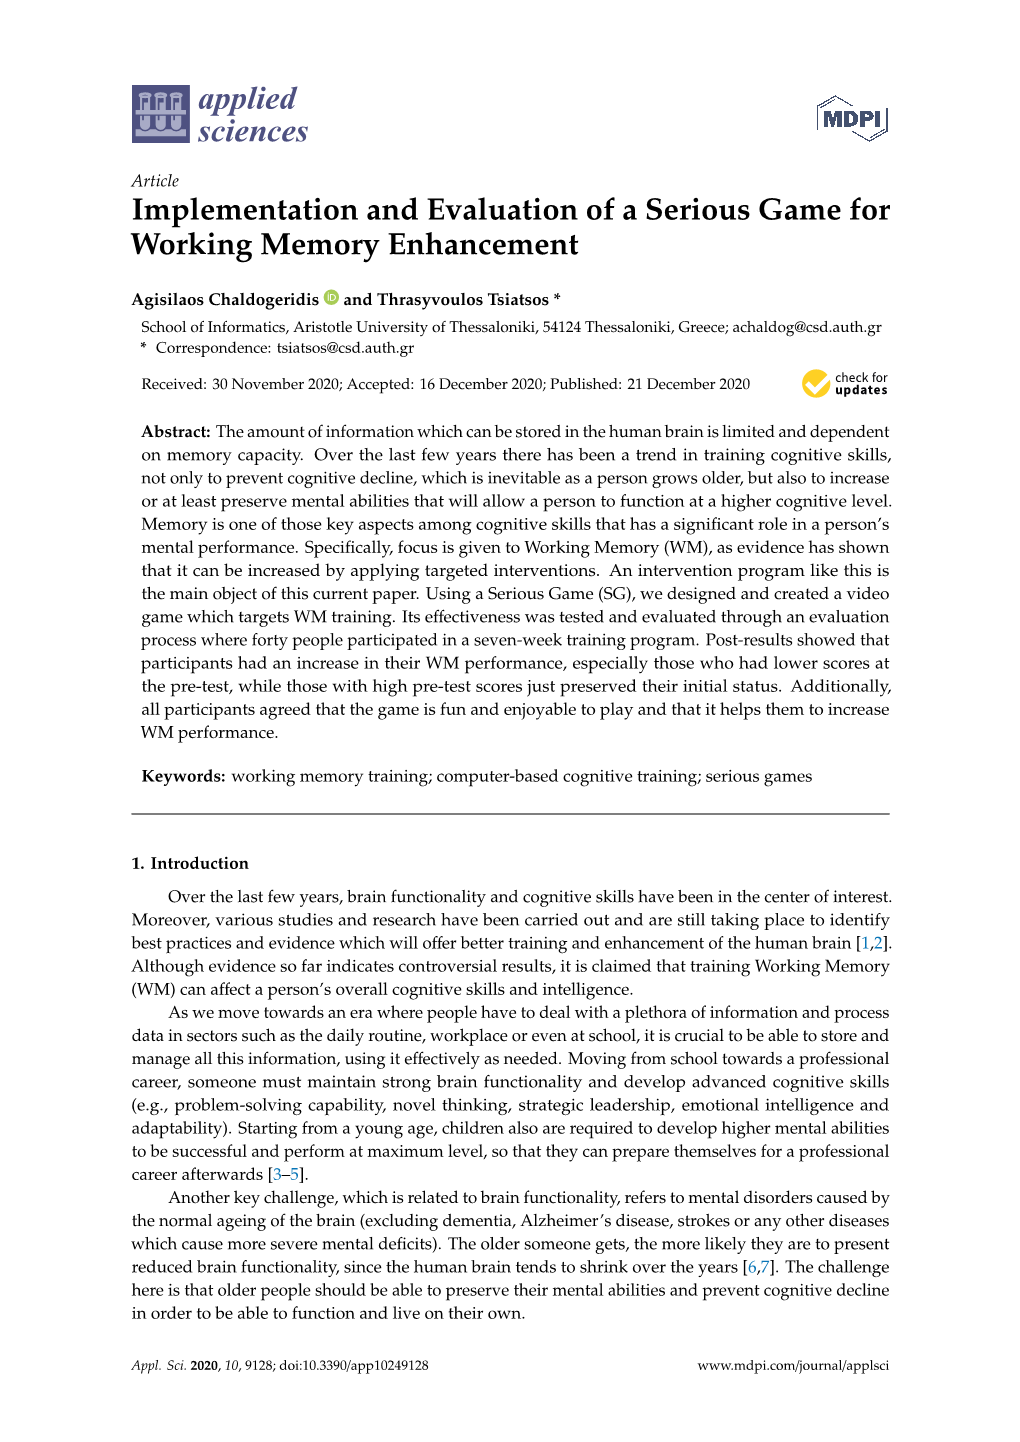 Implementation and Evaluation of a Serious Game for Working Memory Enhancement